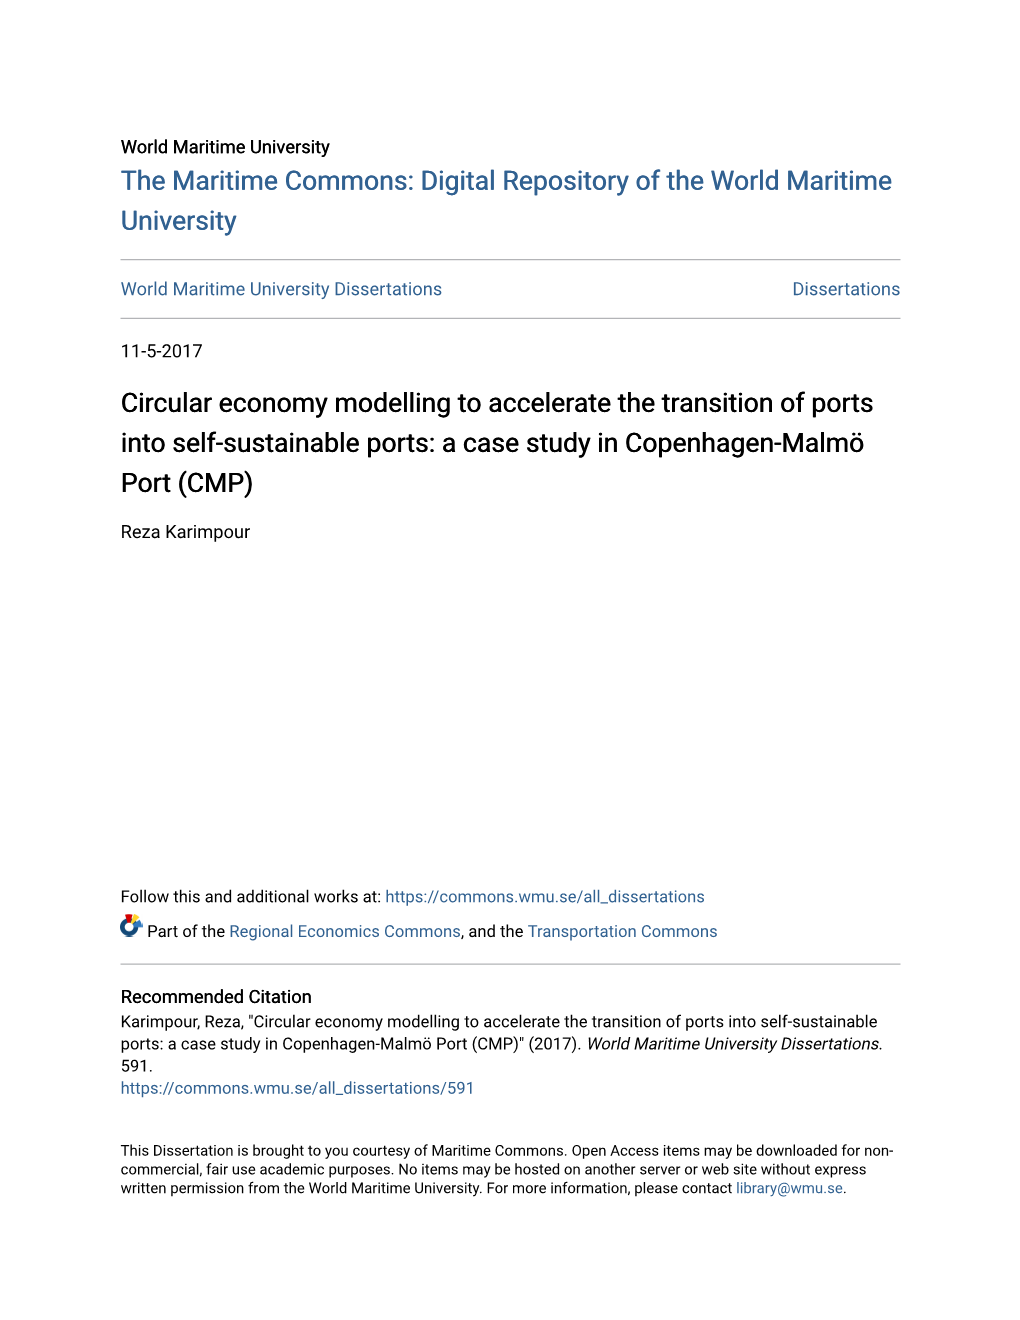 Circular Economy Modelling to Accelerate the Transition of Ports Into Self-Sustainable Ports: a Case Study in Copenhagen-Malmö Port (CMP)